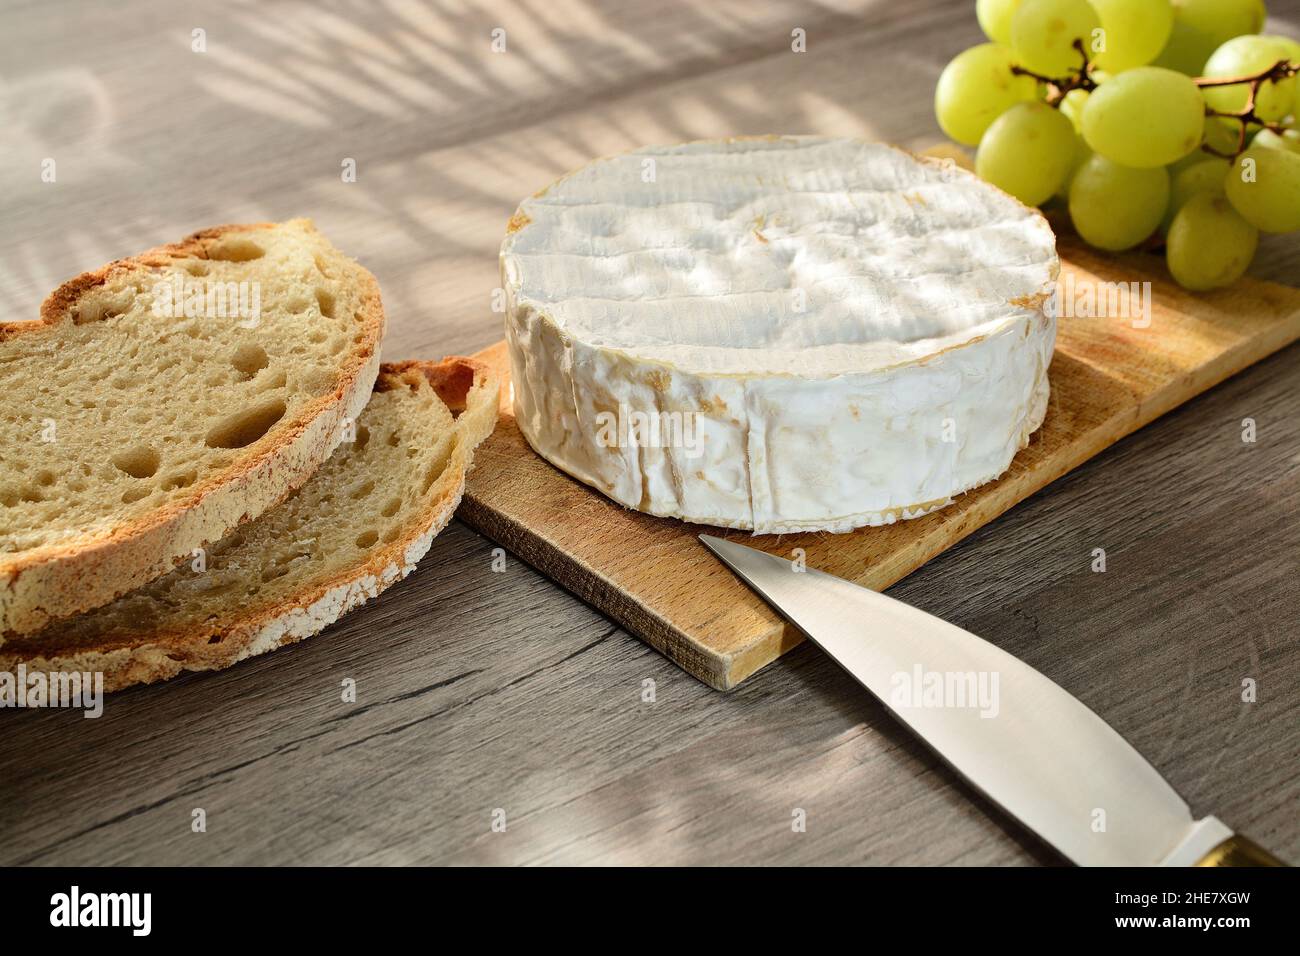 French camembert of Normandy served on wooden cutting board with grapes and slices of bread. Stock Photo